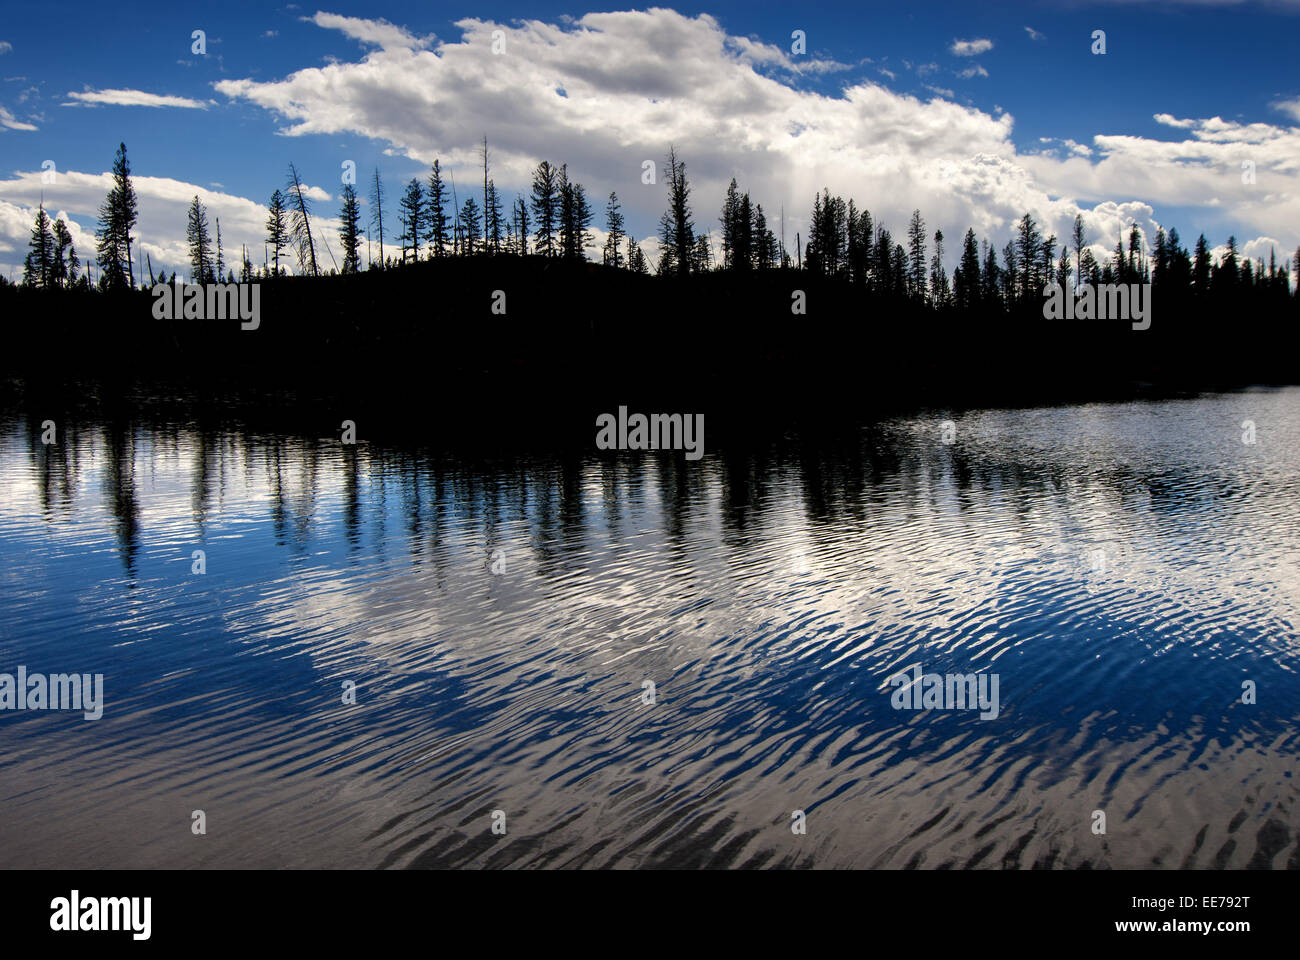 Landscape of pine trees silhouetted in river or lake Stock Photo